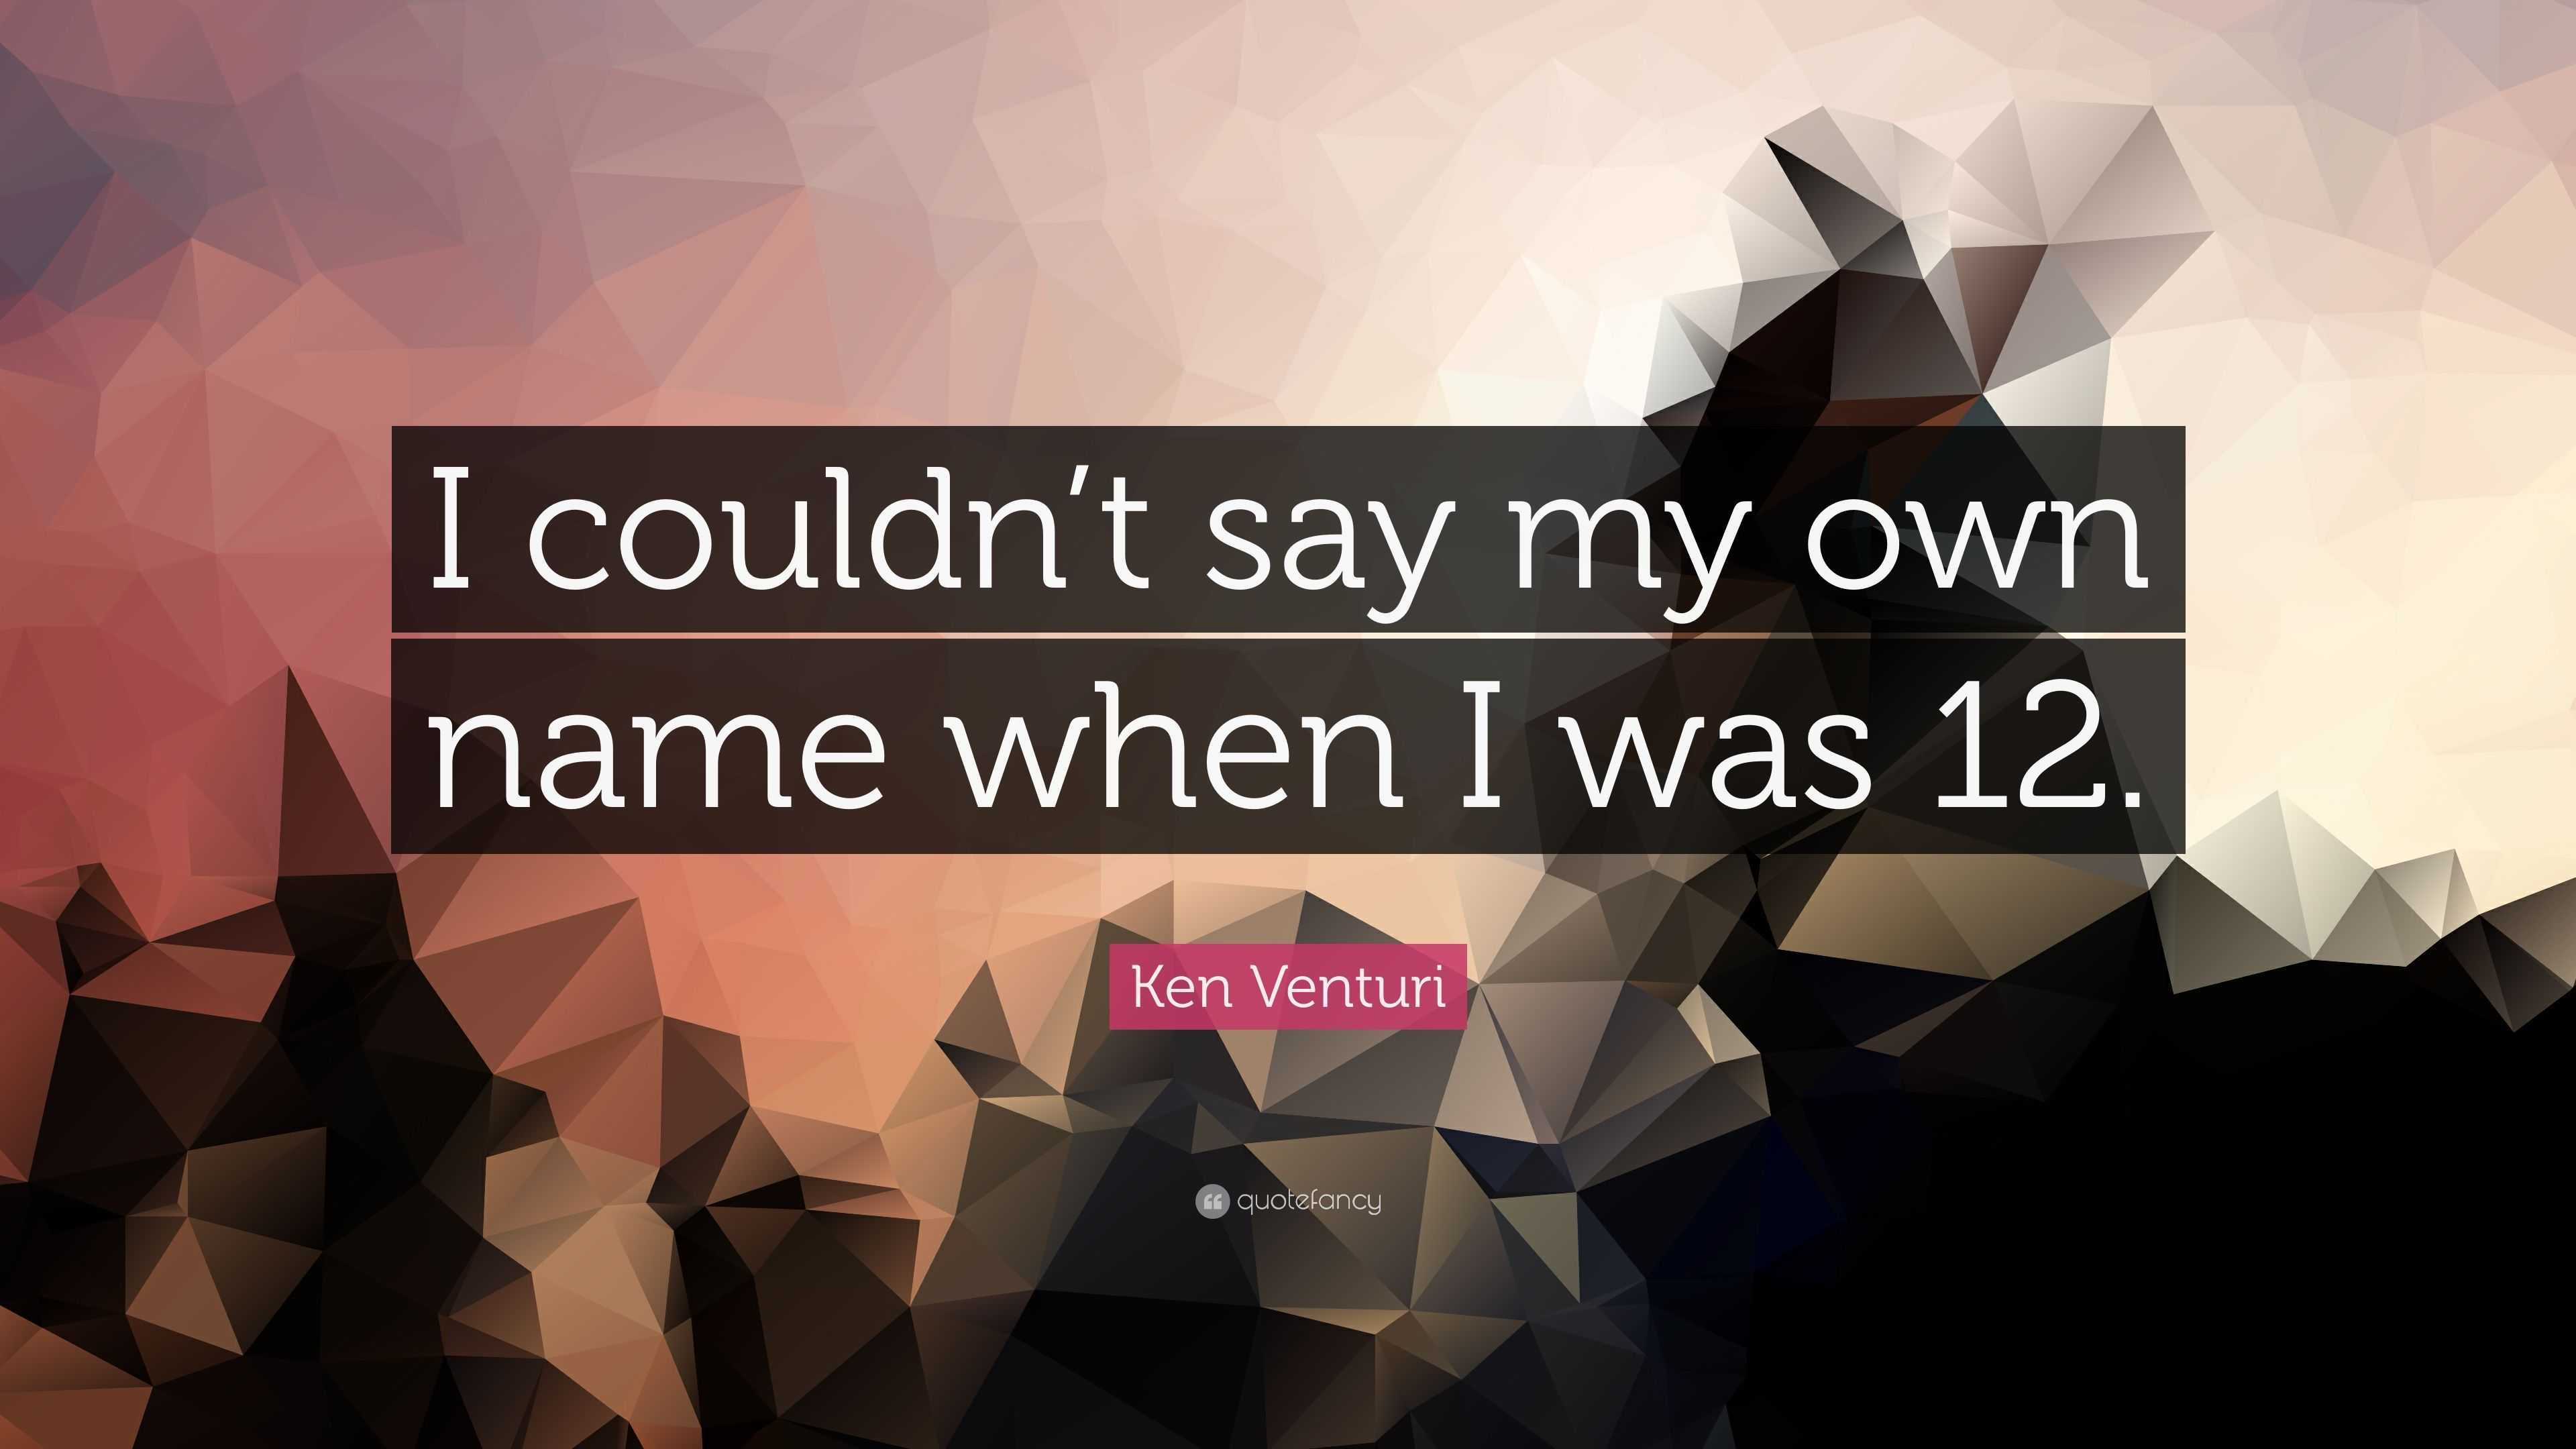 Ken Venturi Quote: “I couldn't say my own name when I was 12.”